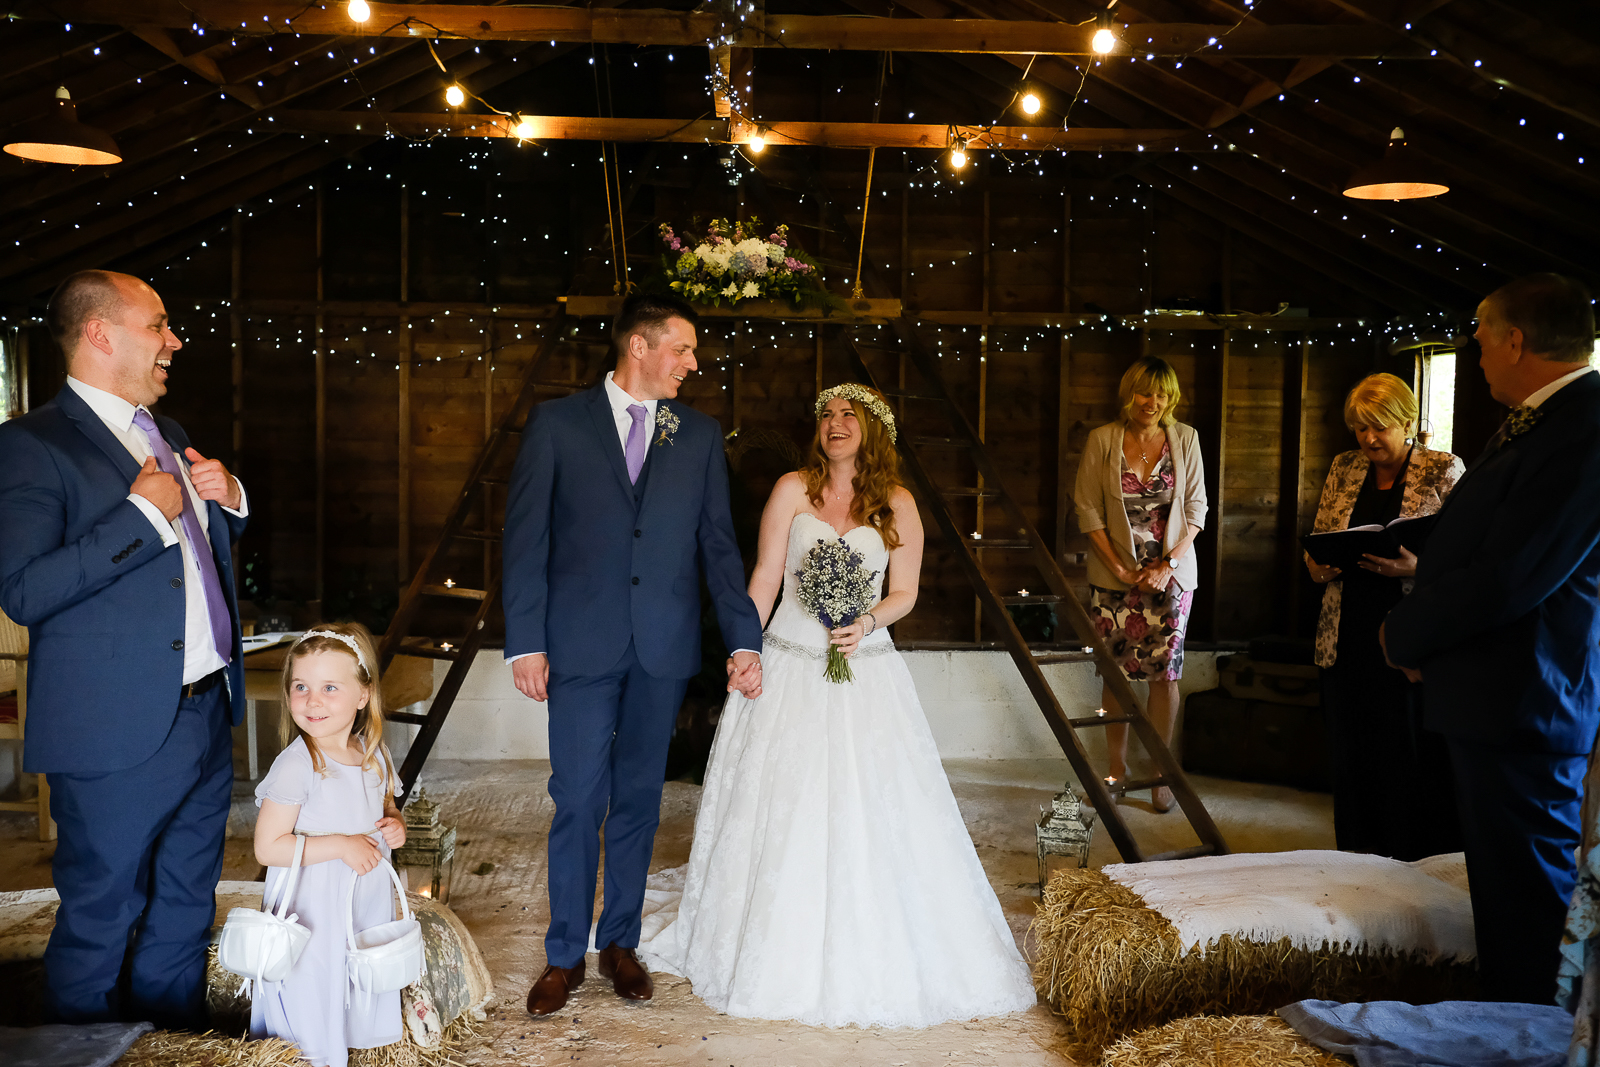 Rustic elopement at The Cow Shed in Cornwall 044.jpg